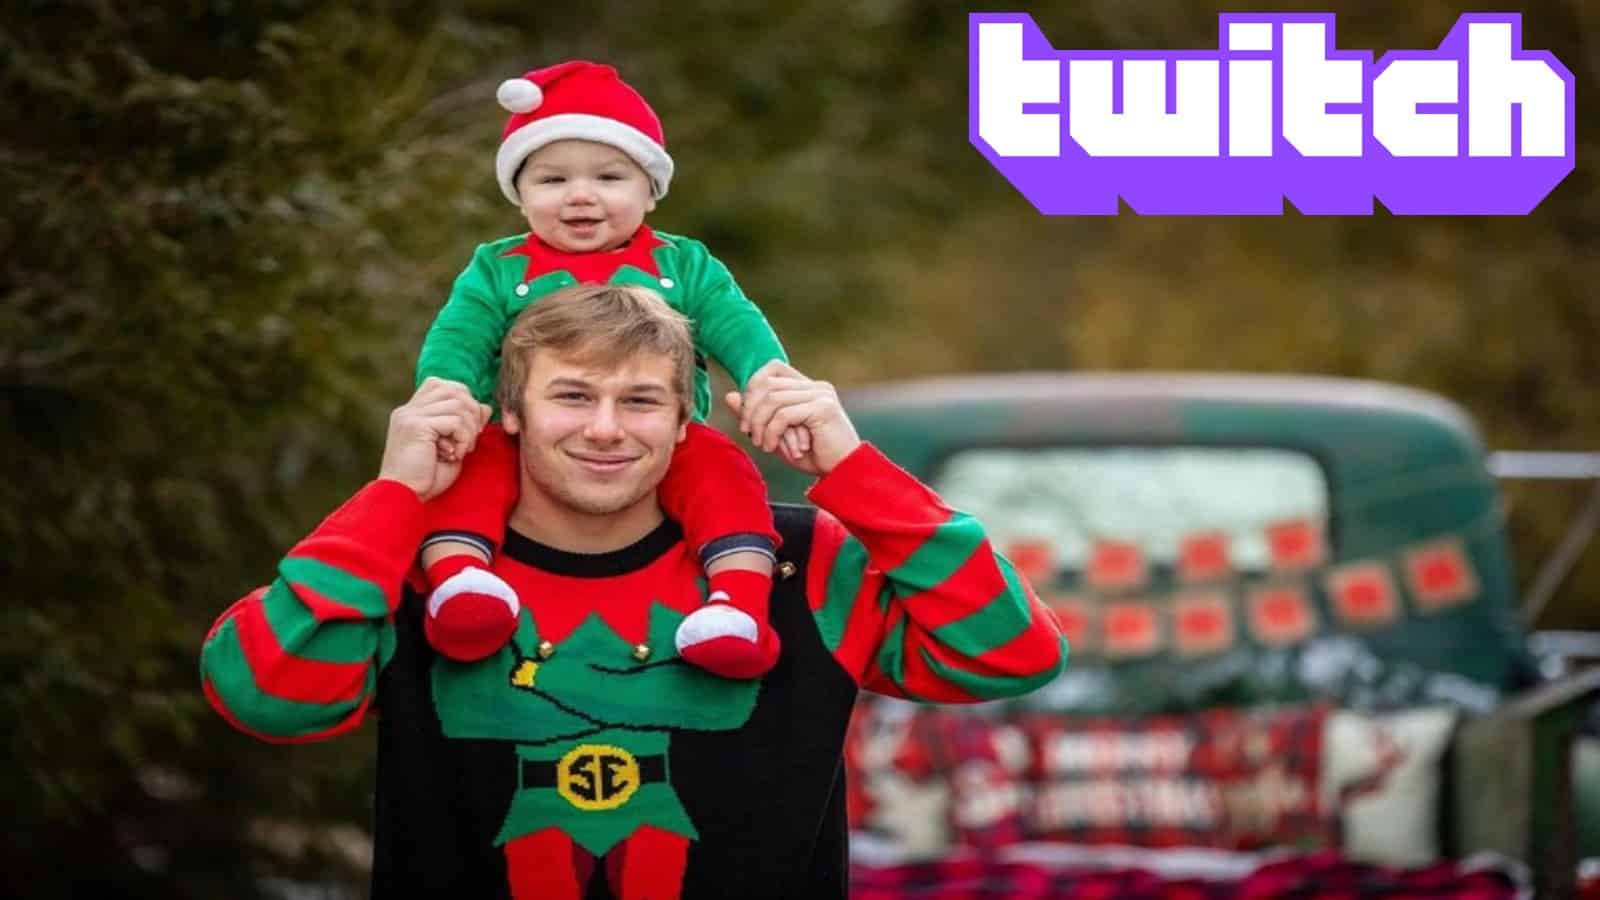 Xposed and his son in Christmas outfits